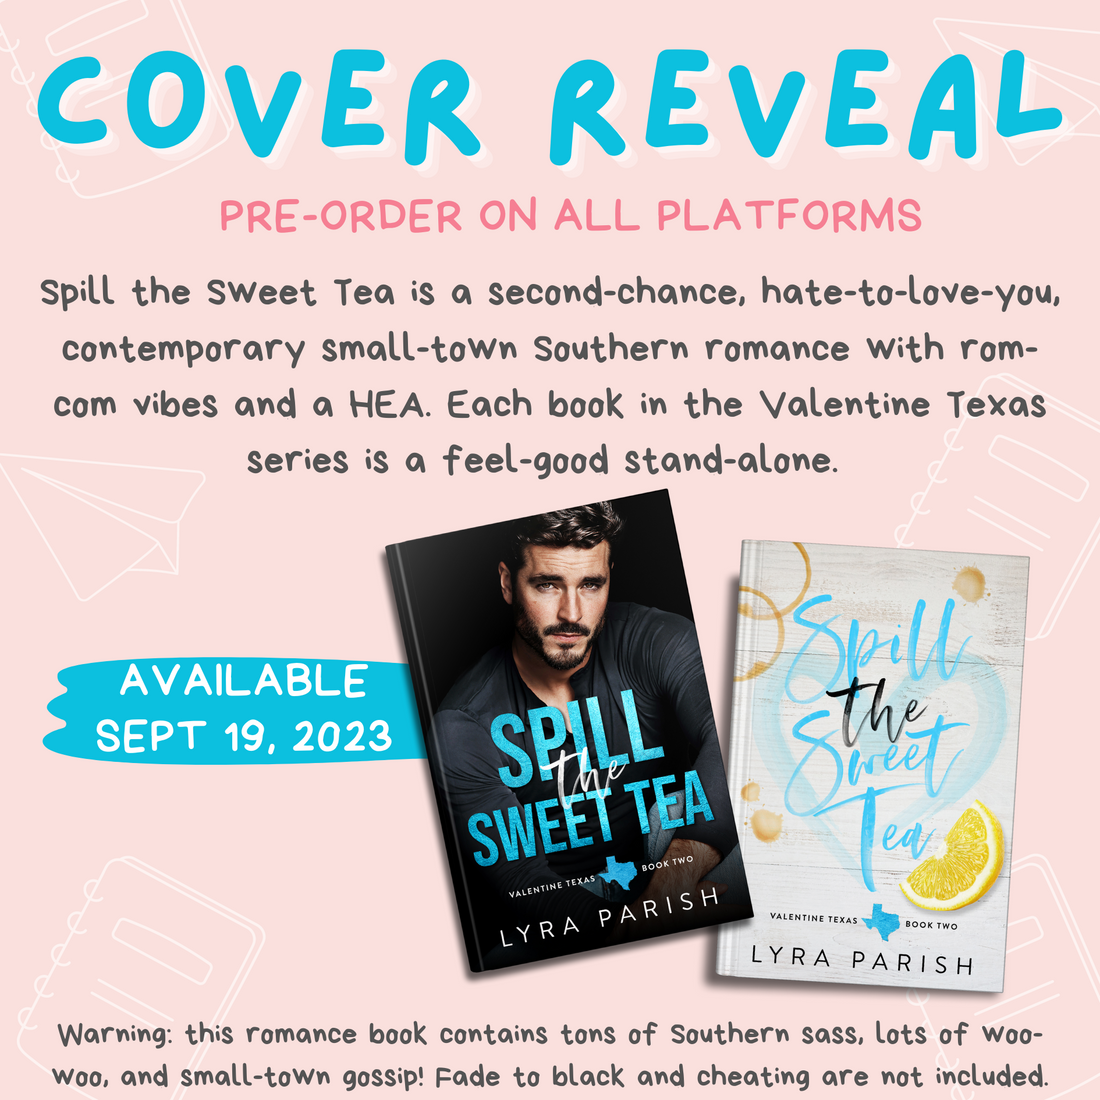 Spill the Sweet Tea Cover Reveal & Exciting Audio/Shop News!